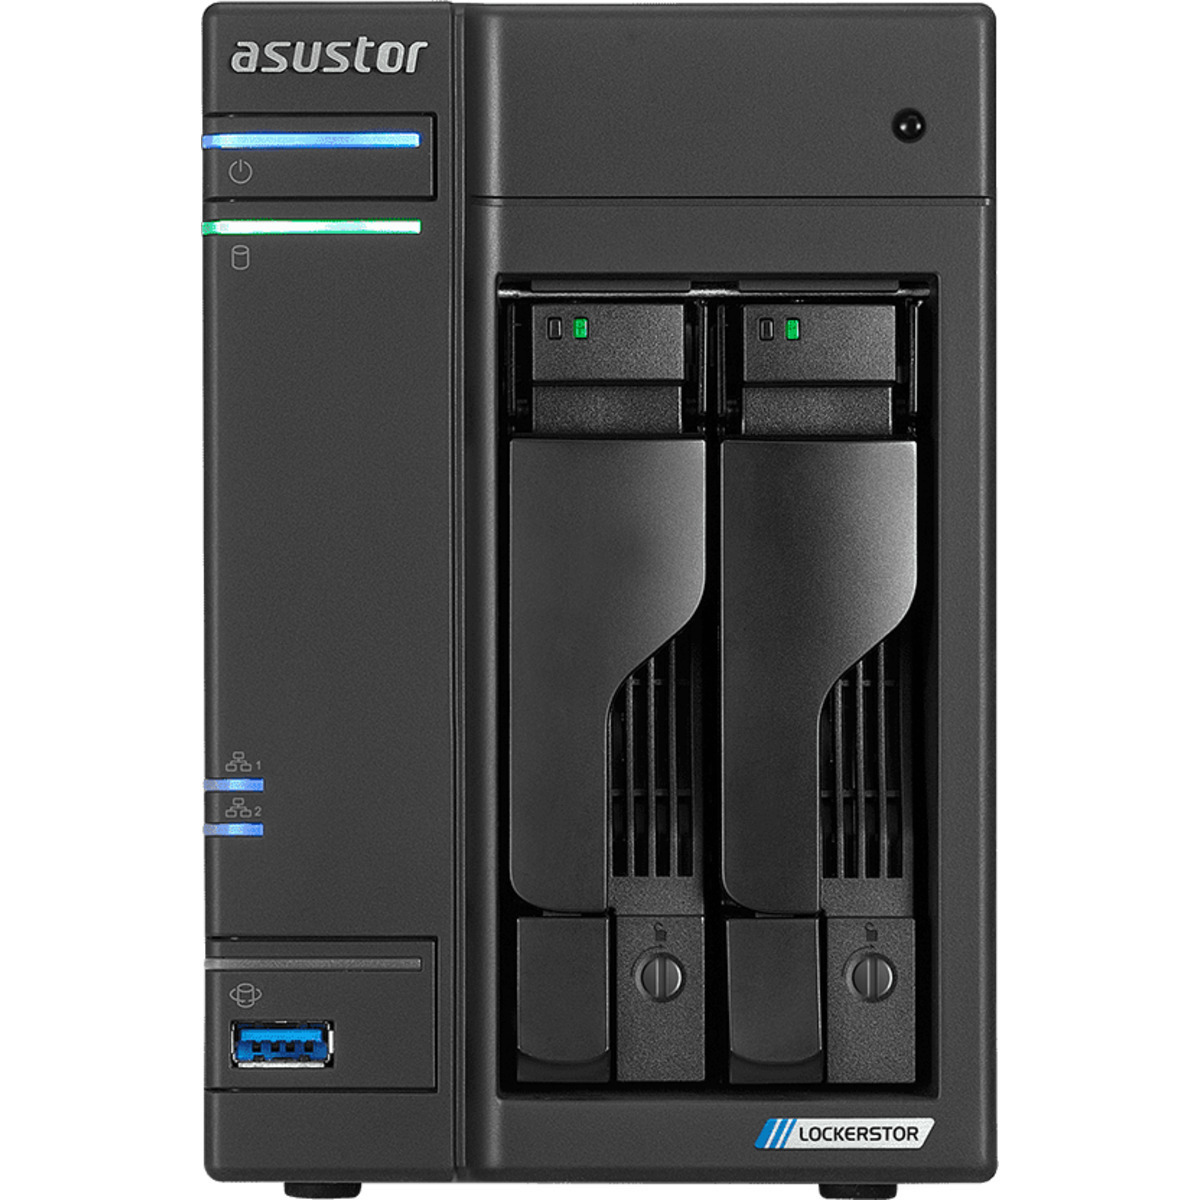 ASUSTOR AS6602T Lockerstor 2 10tb 2-Bay Desktop Multimedia / Power User / Business NAS - Network Attached Storage Device 1x10tb Seagate IronWolf ST10000VN000 3.5 7200rpm SATA 6Gb/s HDD NAS Class Drives Installed - Burn-In Tested - FREE RAM UPGRADE AS6602T Lockerstor 2